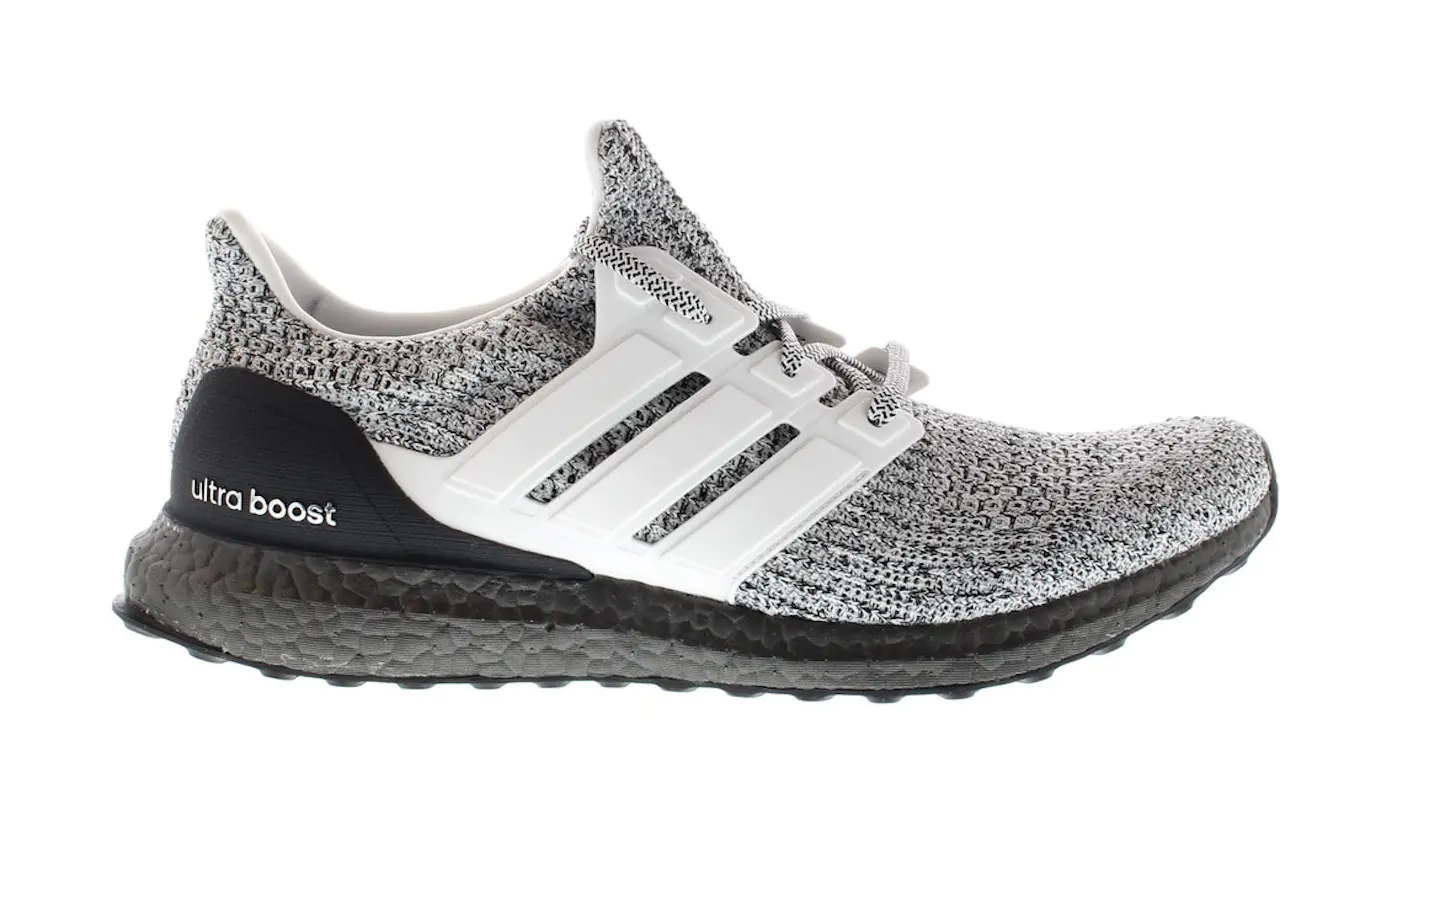 adidas Ultra Boost 4.0 Cookies and Cream Men's - BB6180 - US